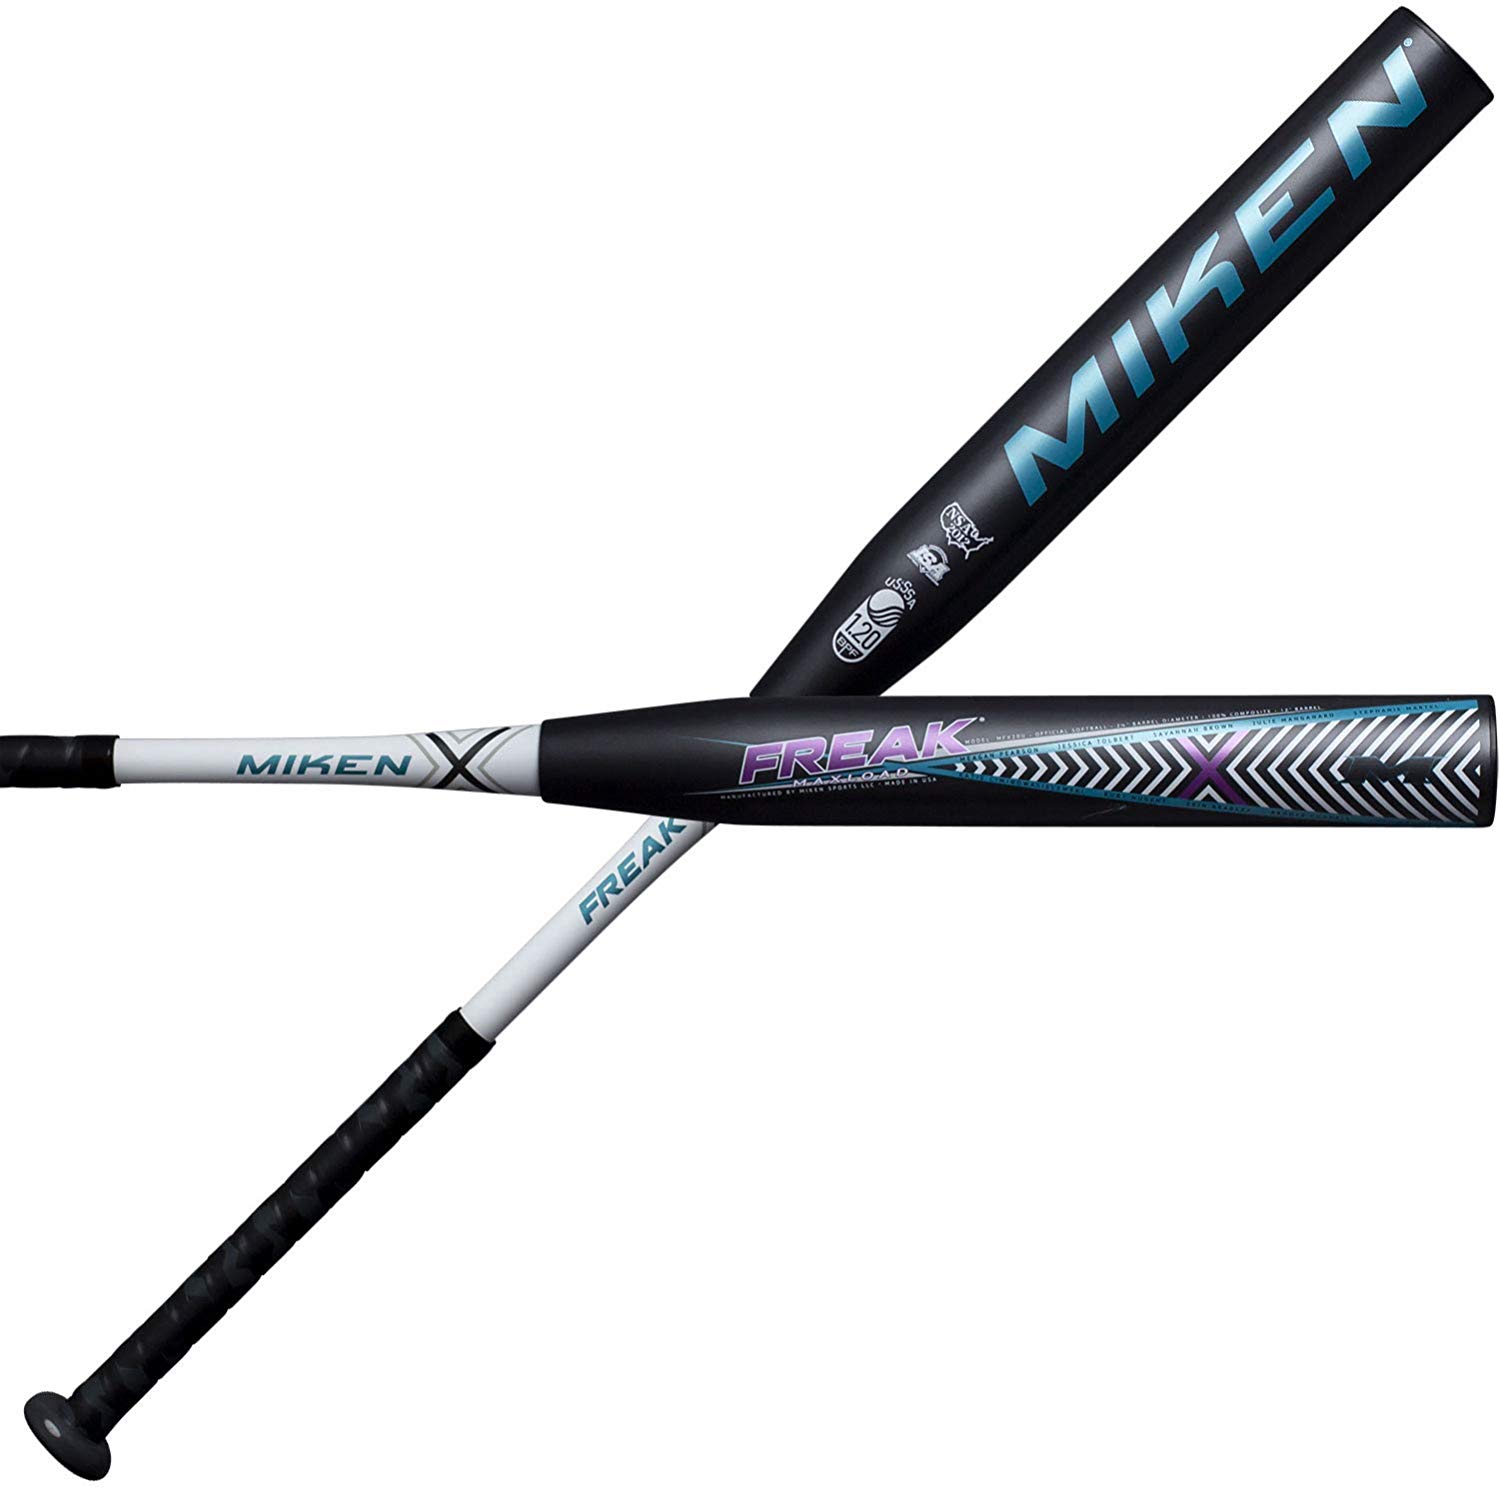 miken-2020-freak-x-maxload-female-usssa-slow-pitch-softball-bat-34-inch-27-oz MFX20U-3-27 Miken 658925043024 EXTENDED SWEET SPOT AND INCREASED FLEX due to 14 inch barrel